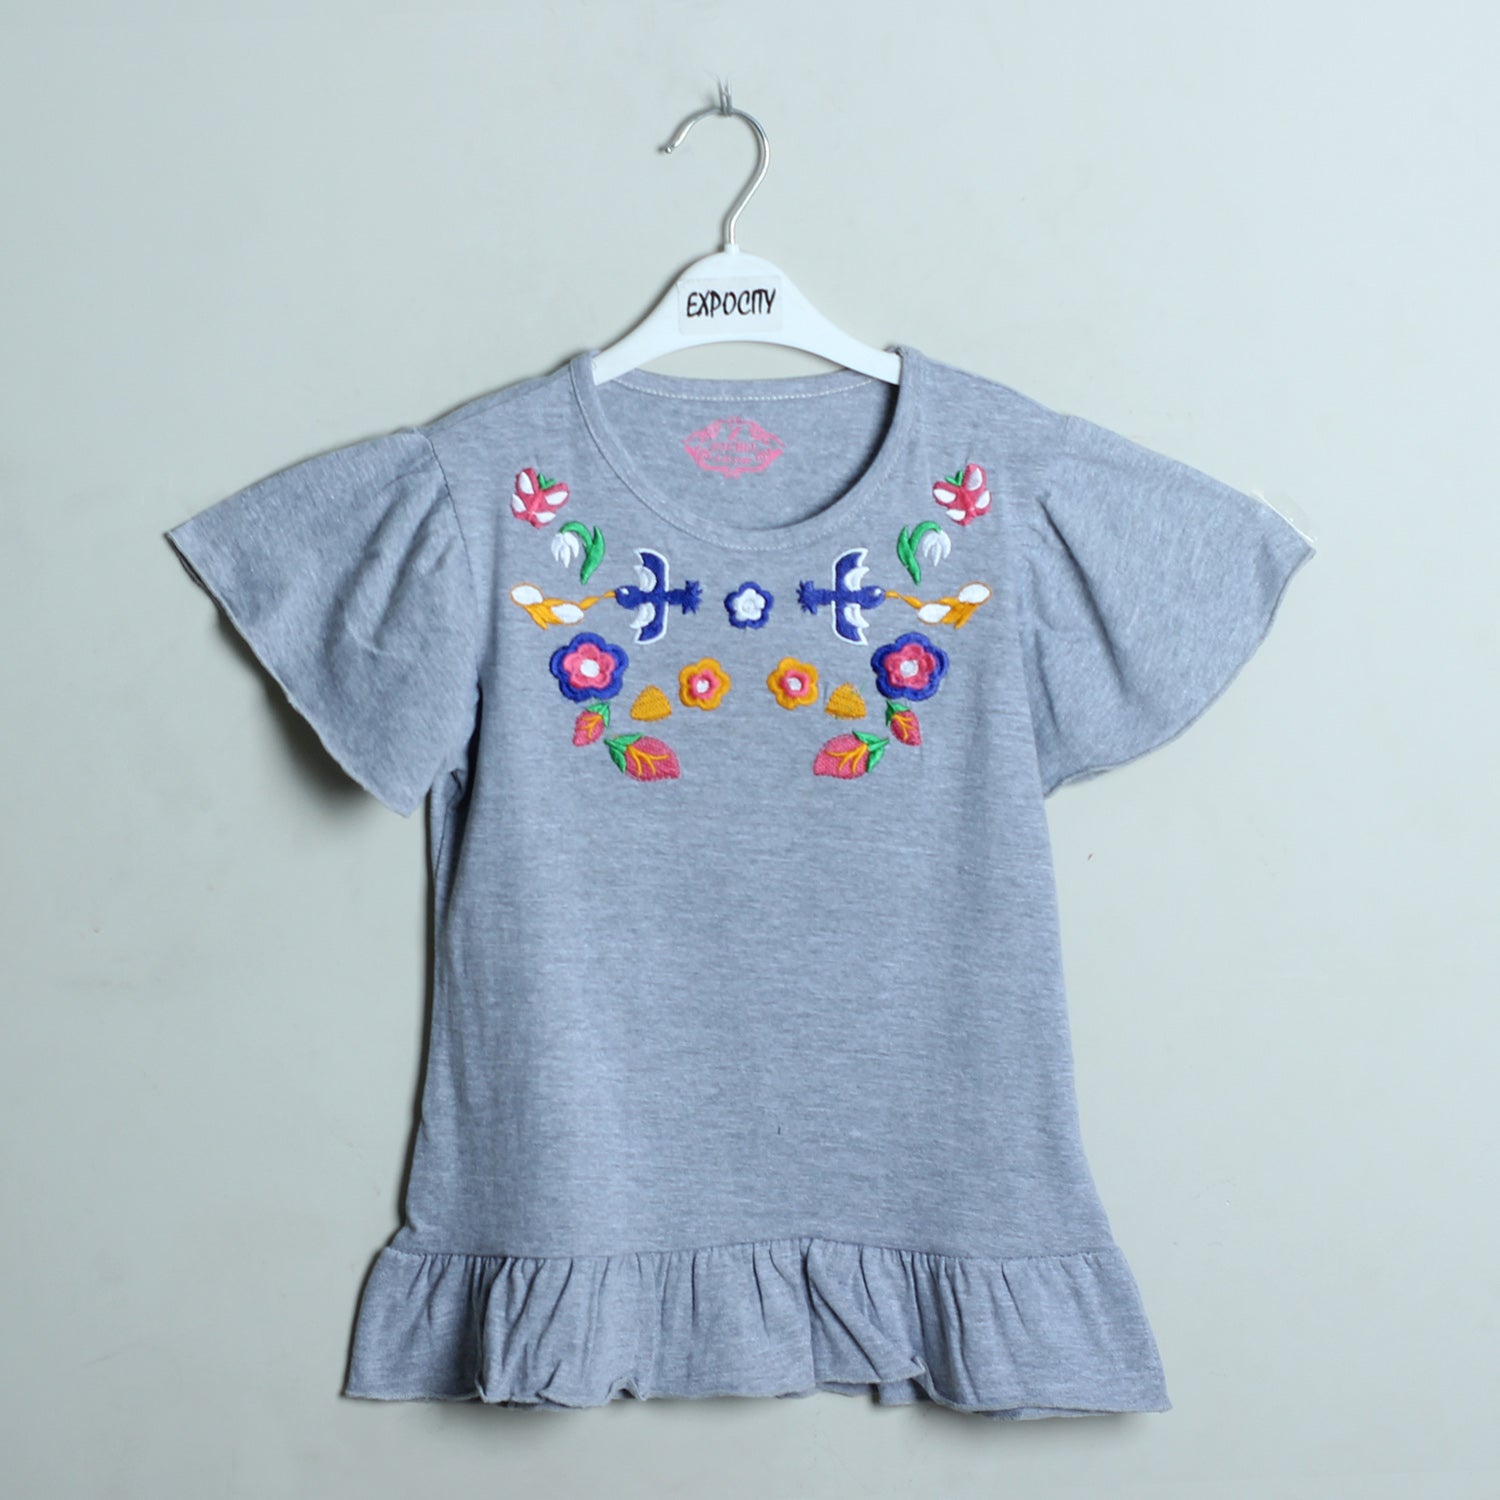 LIGHT GREY Embroided FLOWERS TOP - Expo City